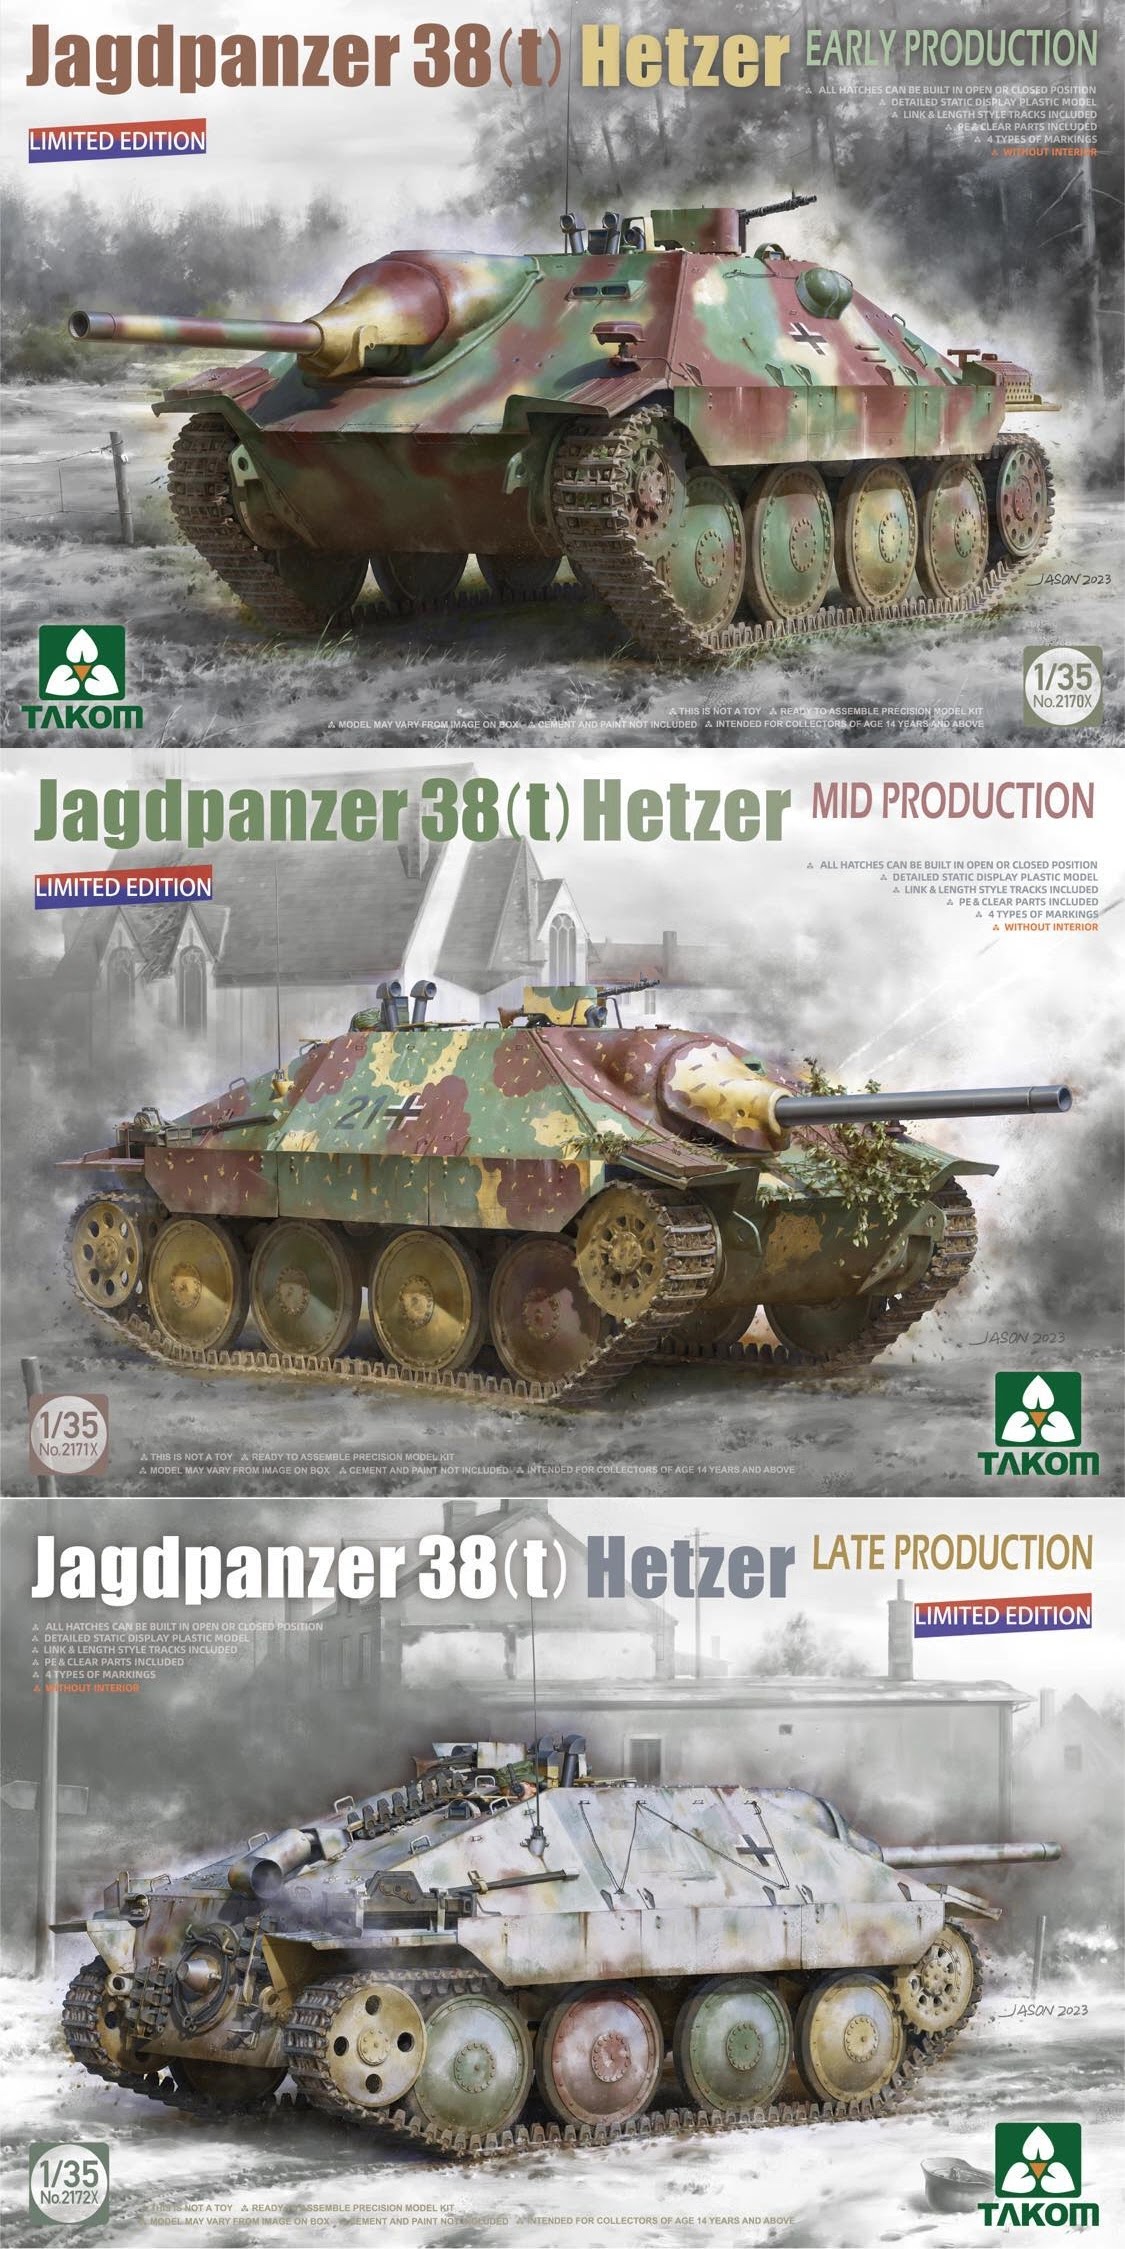 Hetzers - Early, Mid & Past due Box Arts From Takom